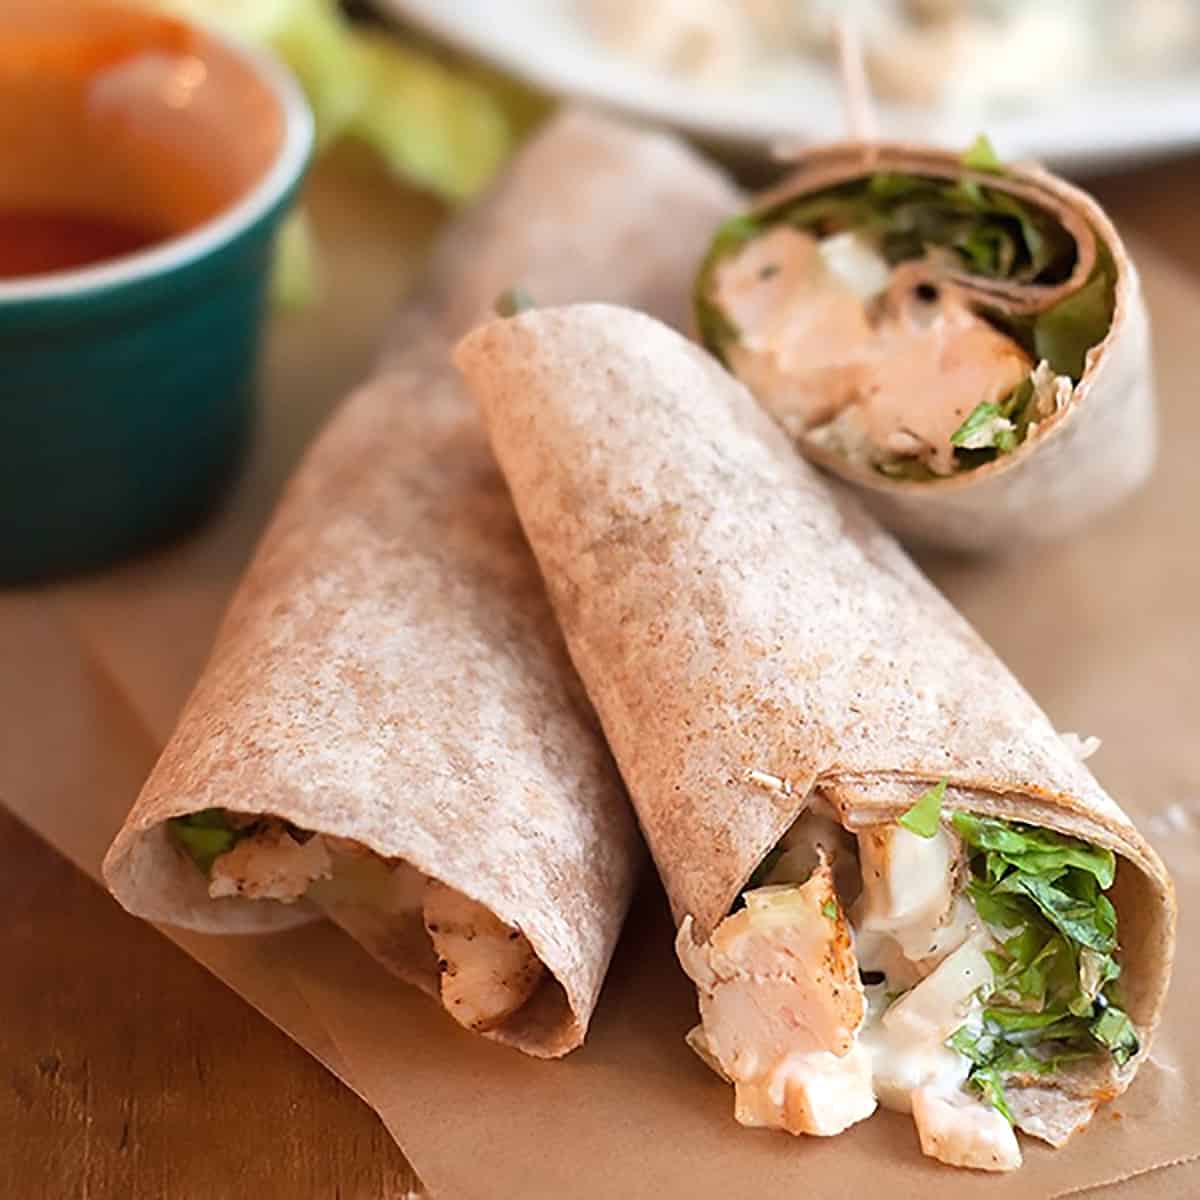 Wraps on brown paper with sauce in the background.